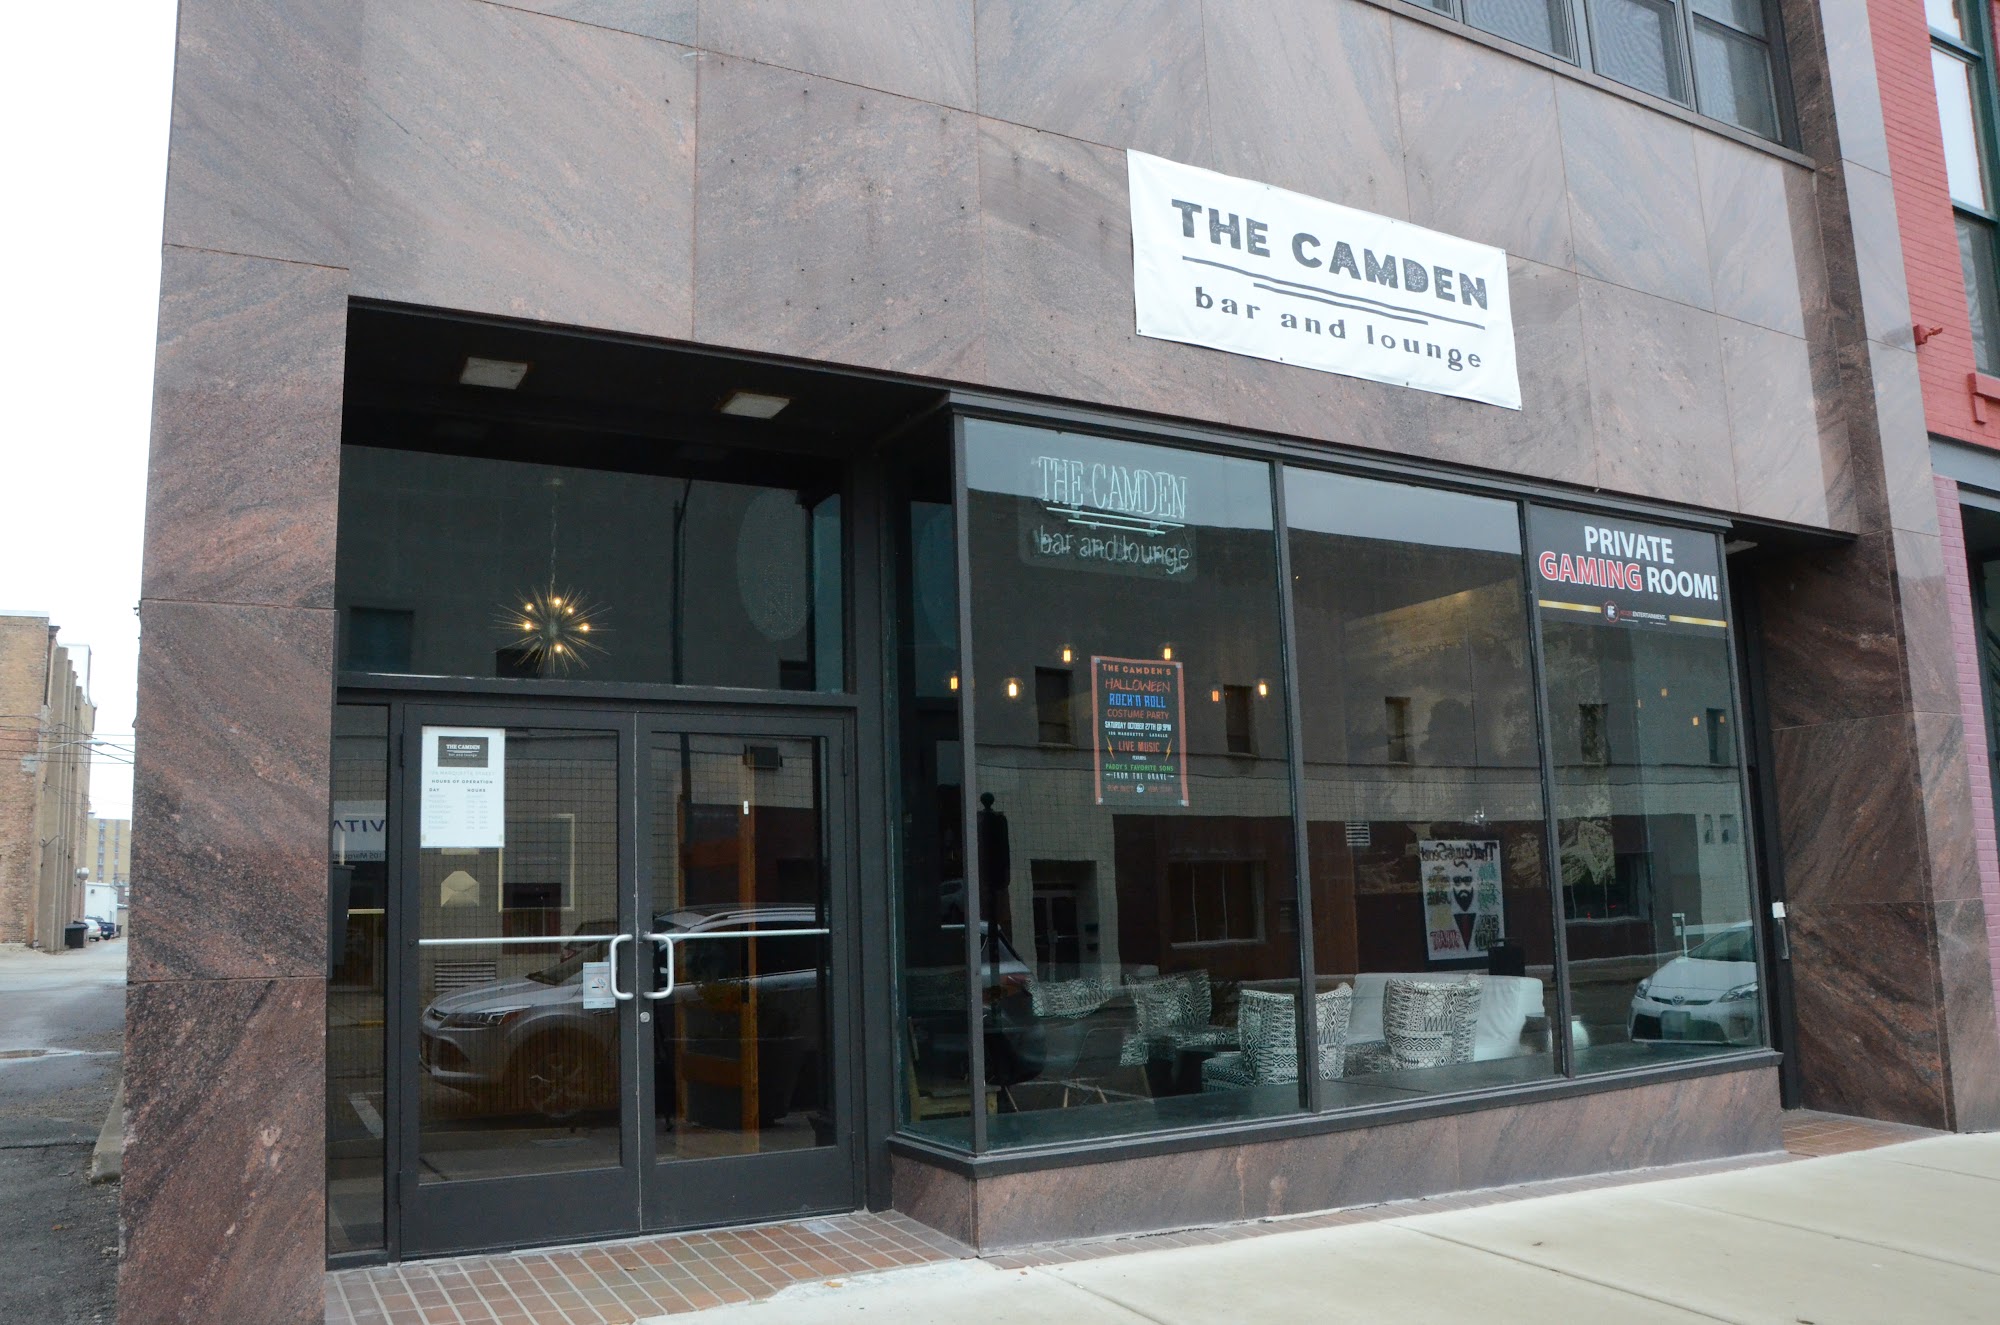 The Camden Bar and Lounge